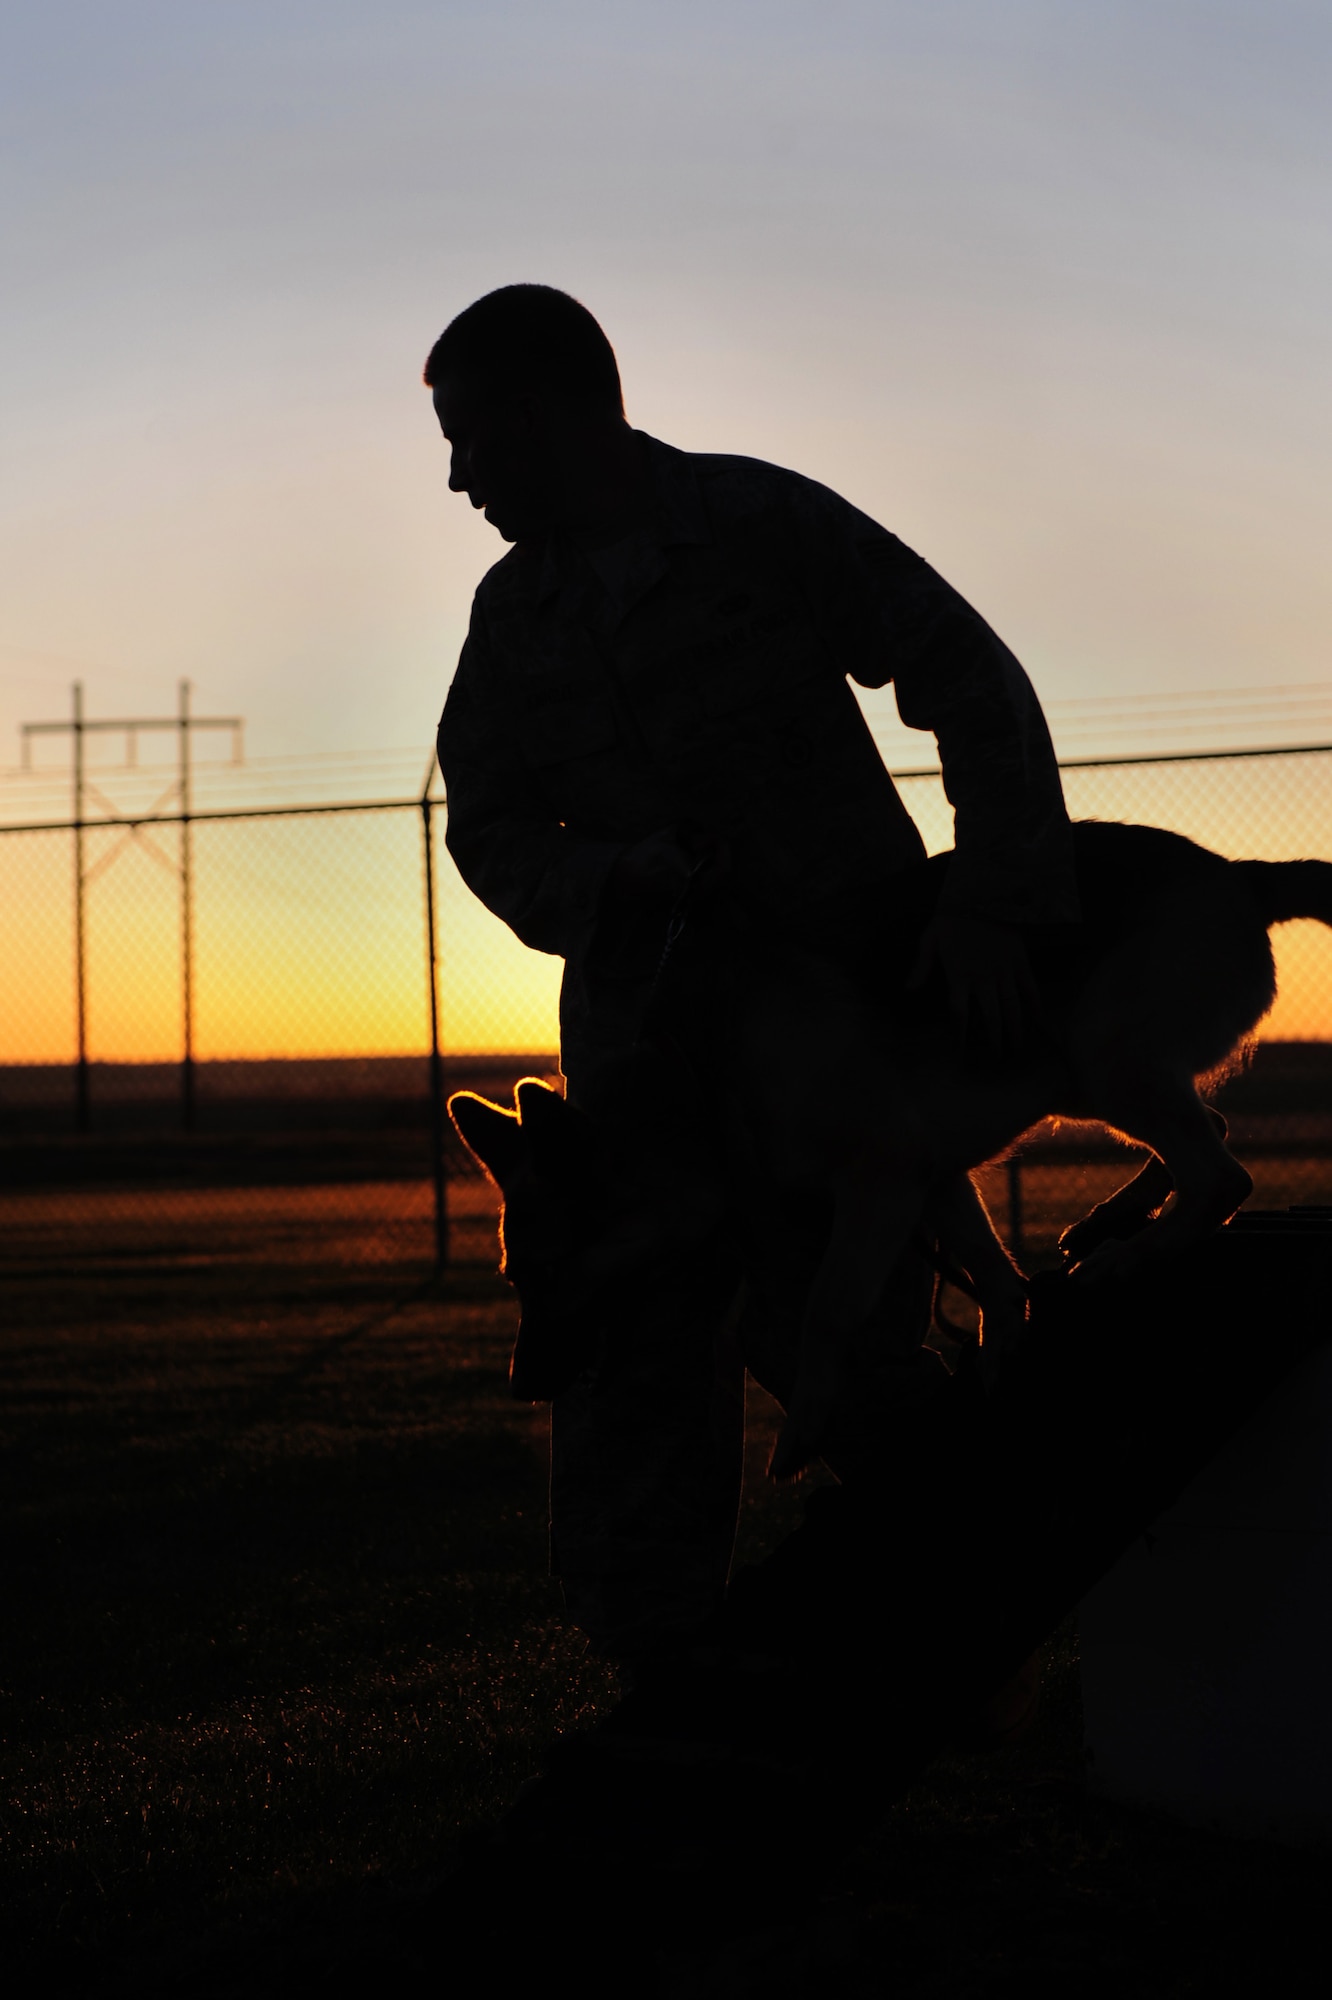 Senior Airman William Knight, 28th Security Forces Squadron dog handler, works on obedience training with Rex, a 28 SFS military working dog in an obstacle course, here, May 7.  Dog handlers perform training with their dogs daily to ensure deployment and real world readiness. (U.S. Air Force photo/Airman 1st Class Joshua J. Seybert)